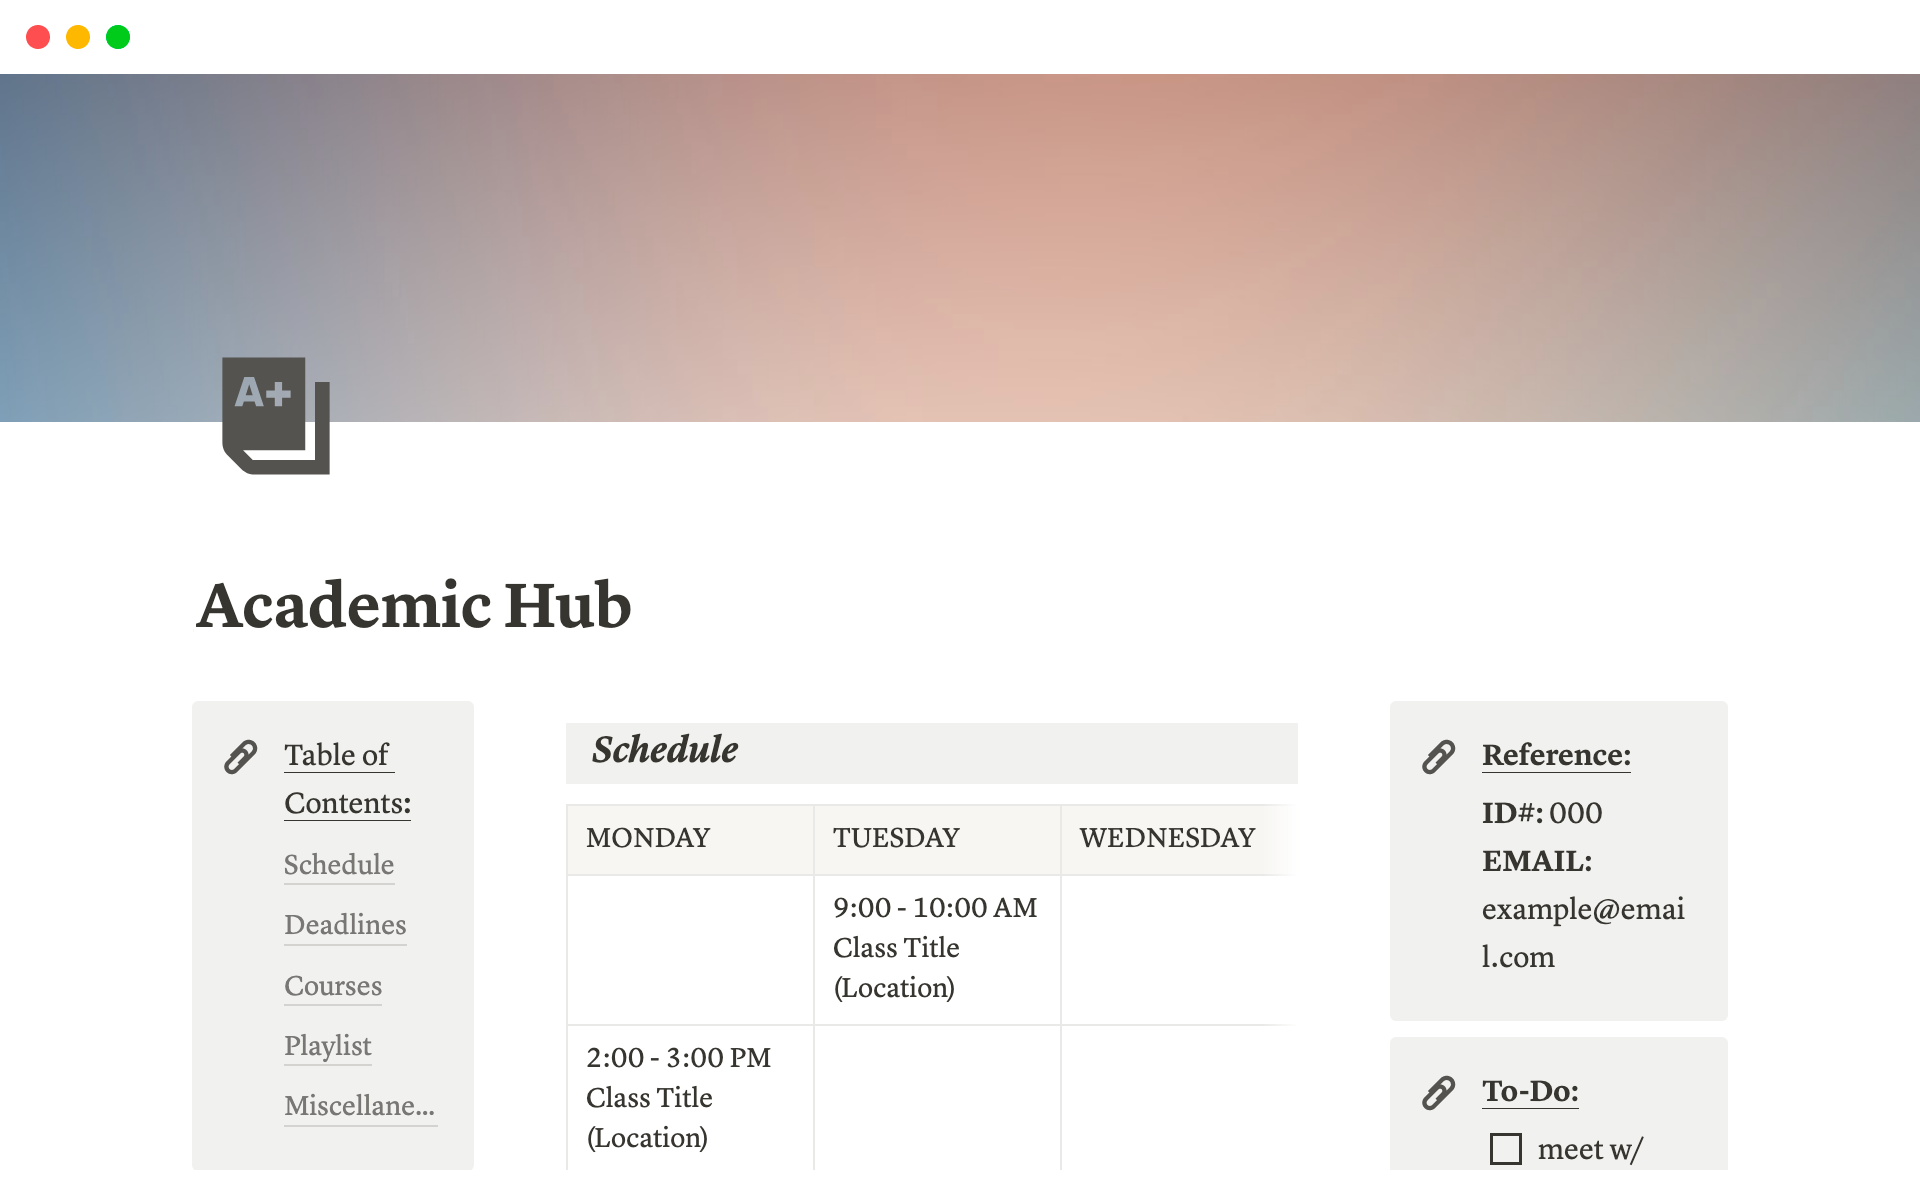 This template is the perfect place to keep track of assignments, notes, course syllabus information, and more!